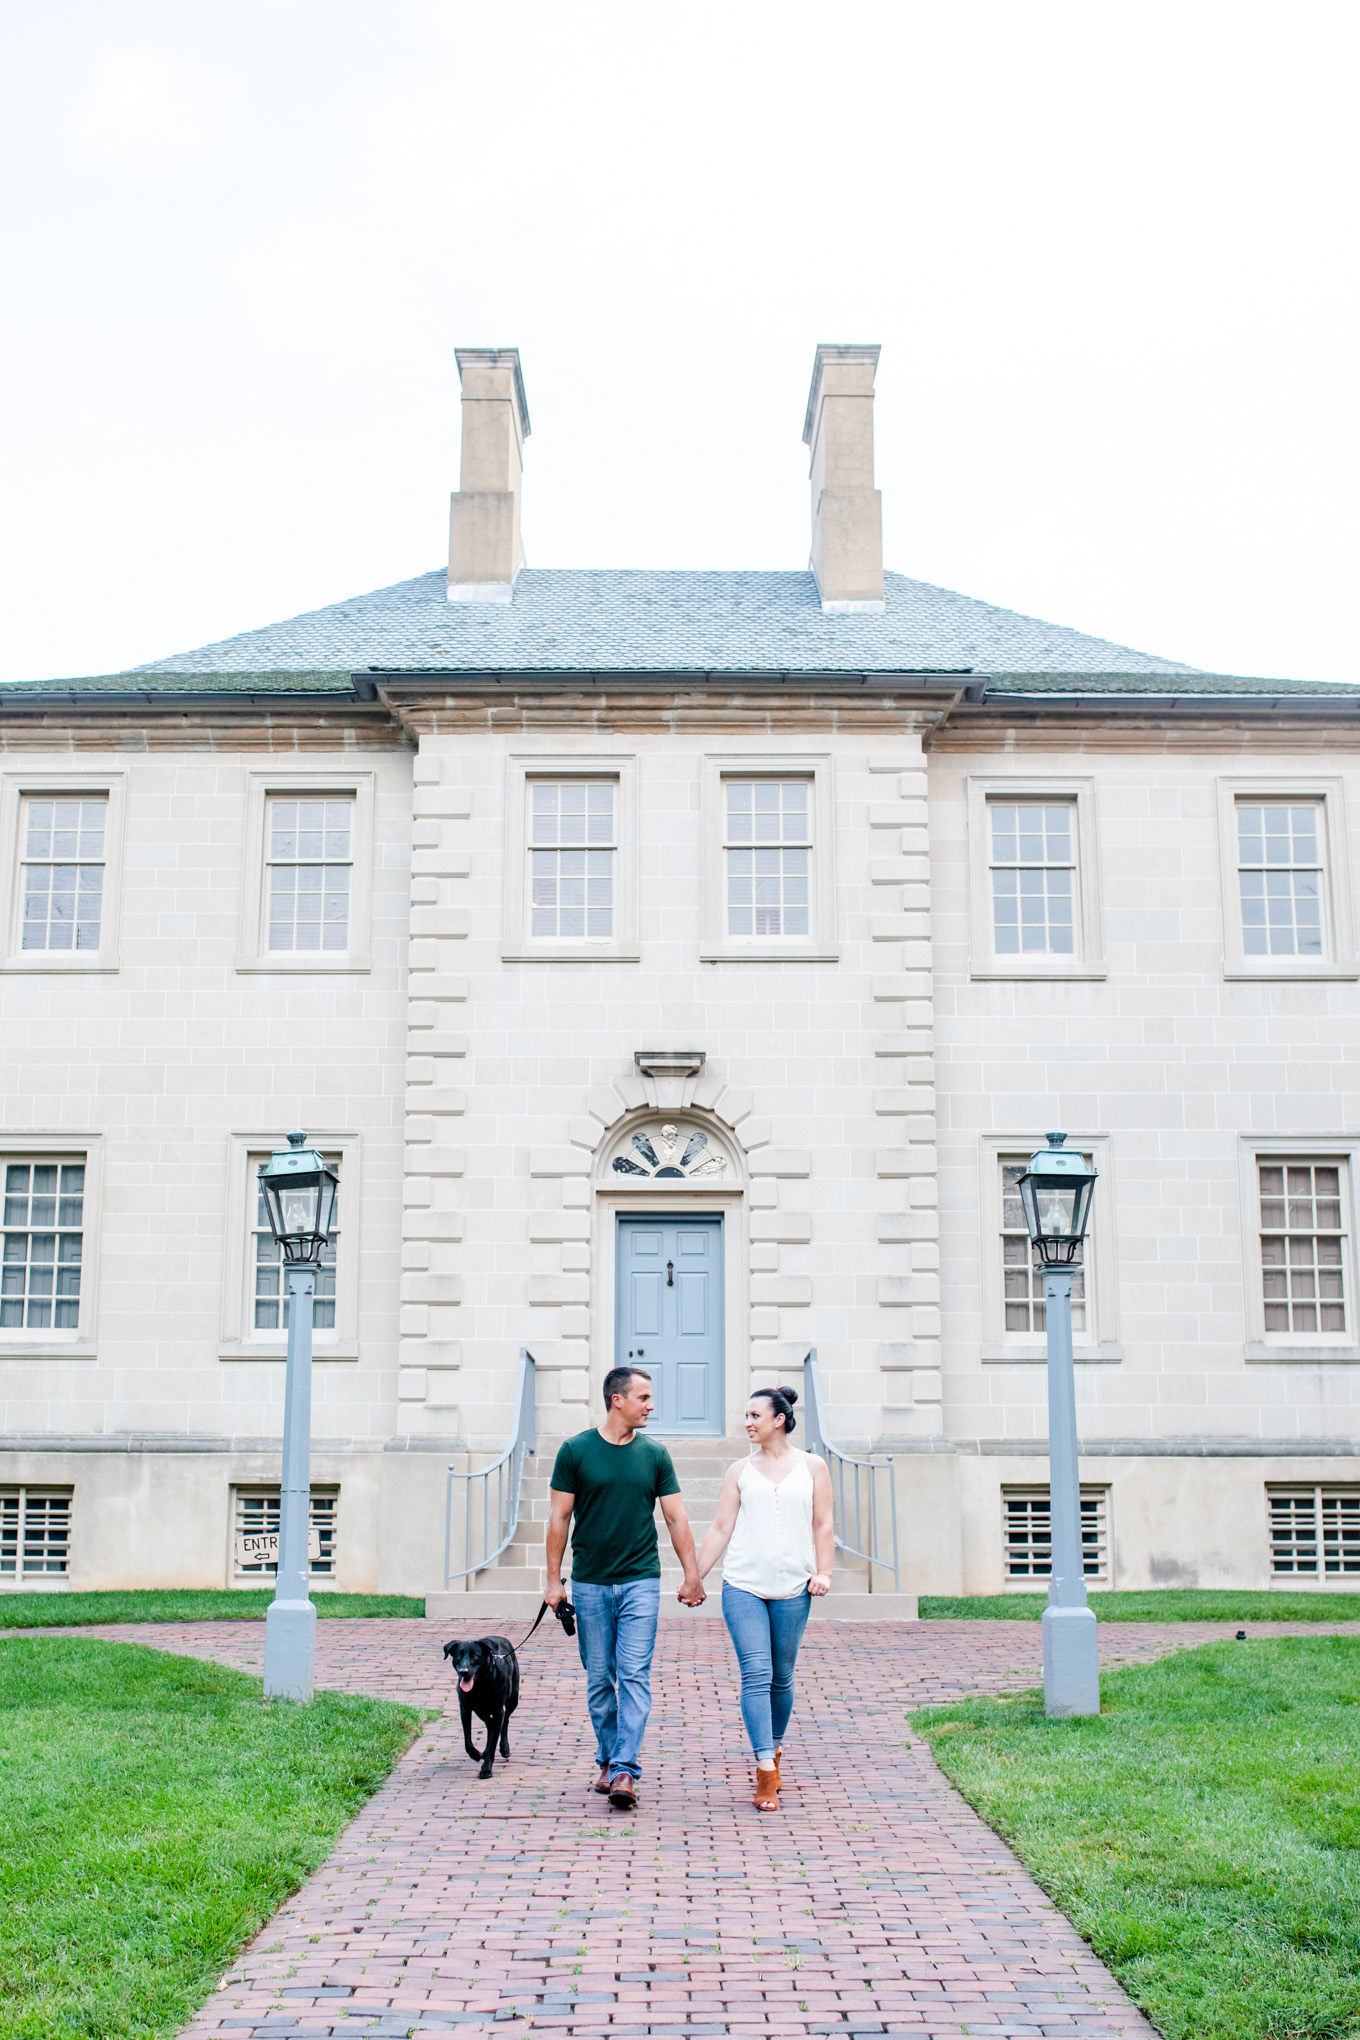 Carlyle House engagement photos, Carlyle House, Alexandria engagement photos, Old Town Alexandria engagement photos, Old Town Alexandria, Alexandria engagement photos, Alexandria Virginia, classic engagement photos, historic homes engagement photos, casual engagement photos, Rachel E.H. Photography, engagement photos with pets, couple walking